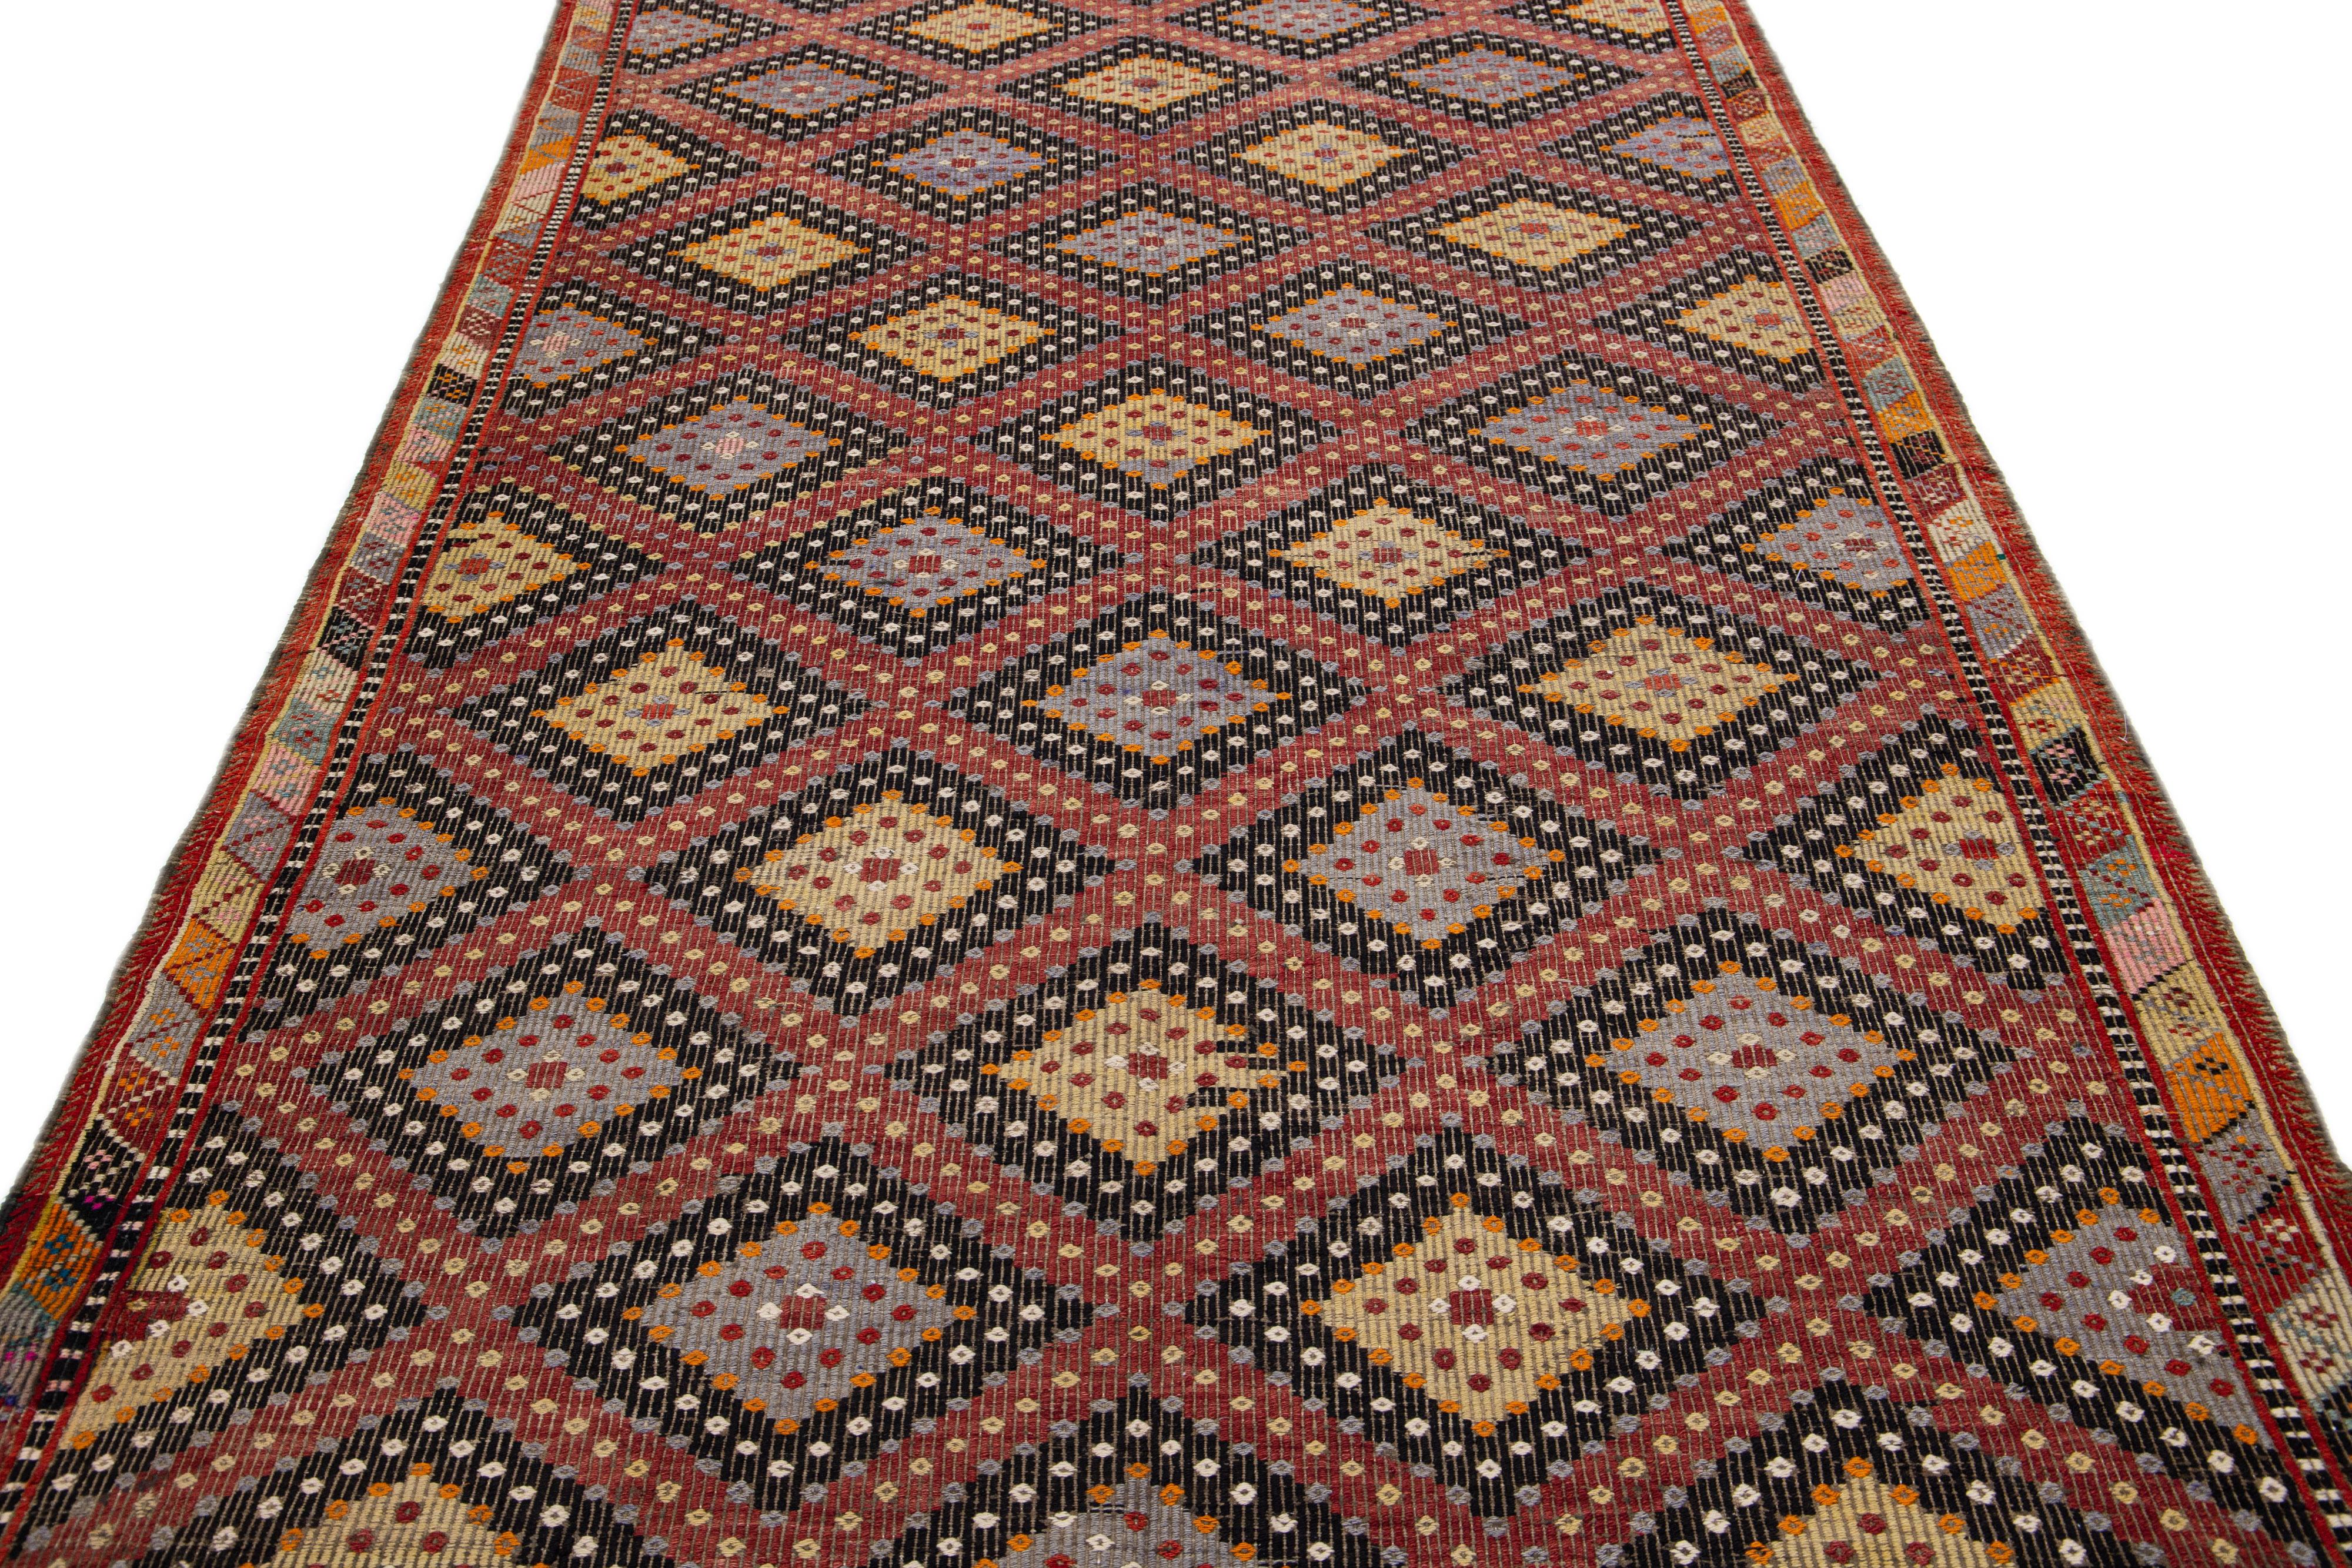 Beautiful vintage Sumakh hand-knotted wool rug with a black color field. This Sumakh rug has red, yellow, gray, and white accents in a gorgeous all-over geometric design.

This rug measures 5'9